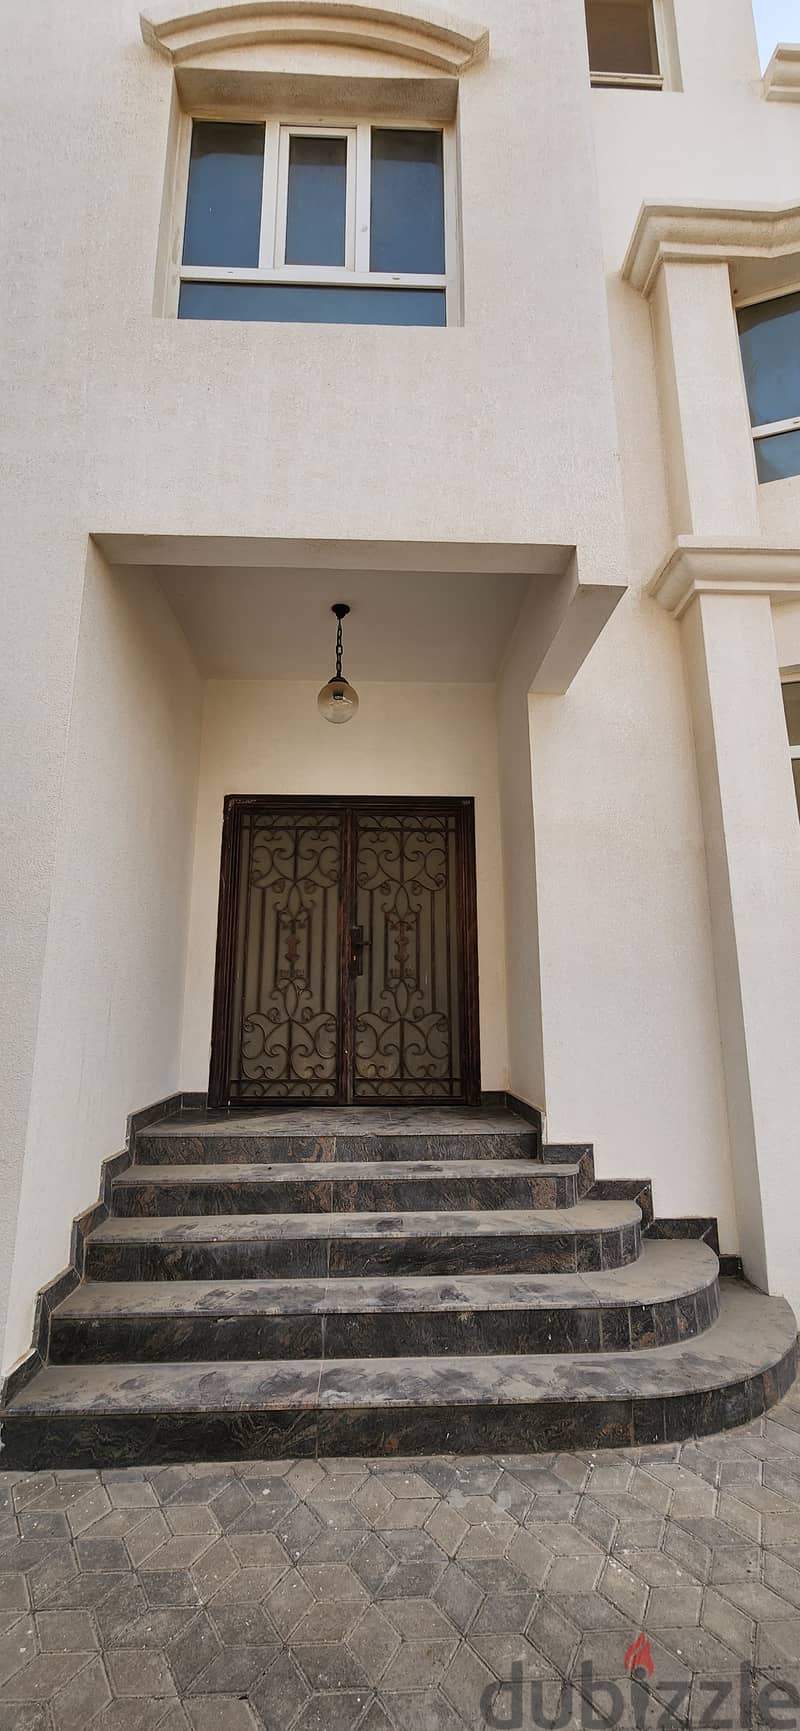 4AK2-beautiful 4BHK villa for rent in ansab 11